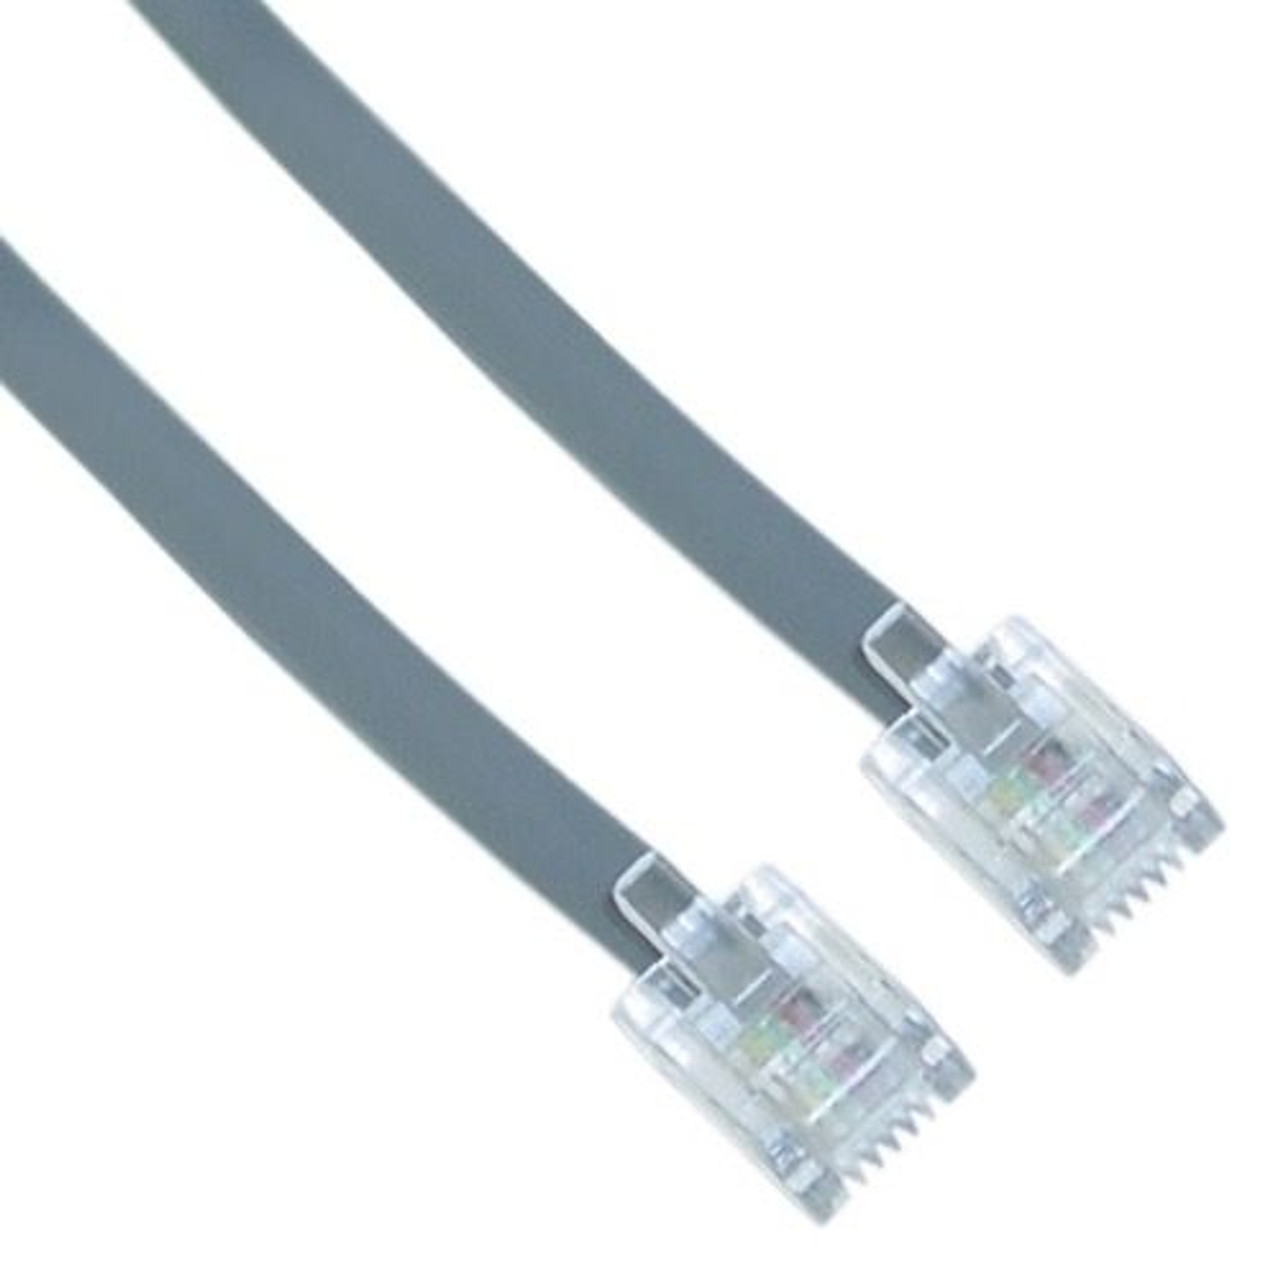 RJ11 4 Conductor Cross Wired Telephone Cable 25 FT